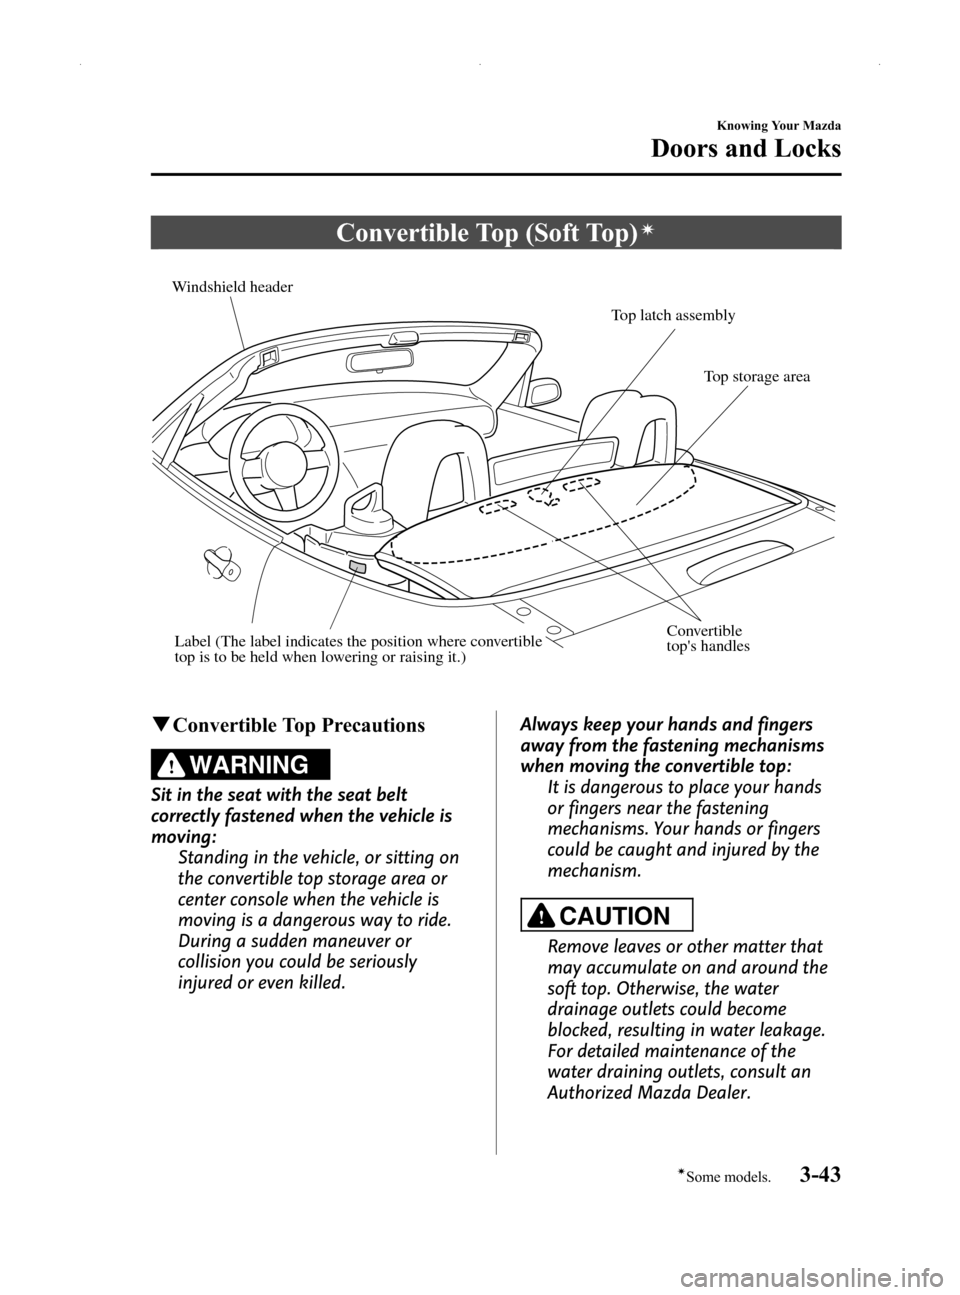 MAZDA MODEL MX-5 2014  Owners Manual (in English) Black plate (97,1)
Convertible Top (Soft Top)í
Windshield headerTop latch assembly
Top storage area
Convertible 
tops handlesLabel (The label indicates the position where convertible 
top is to be h